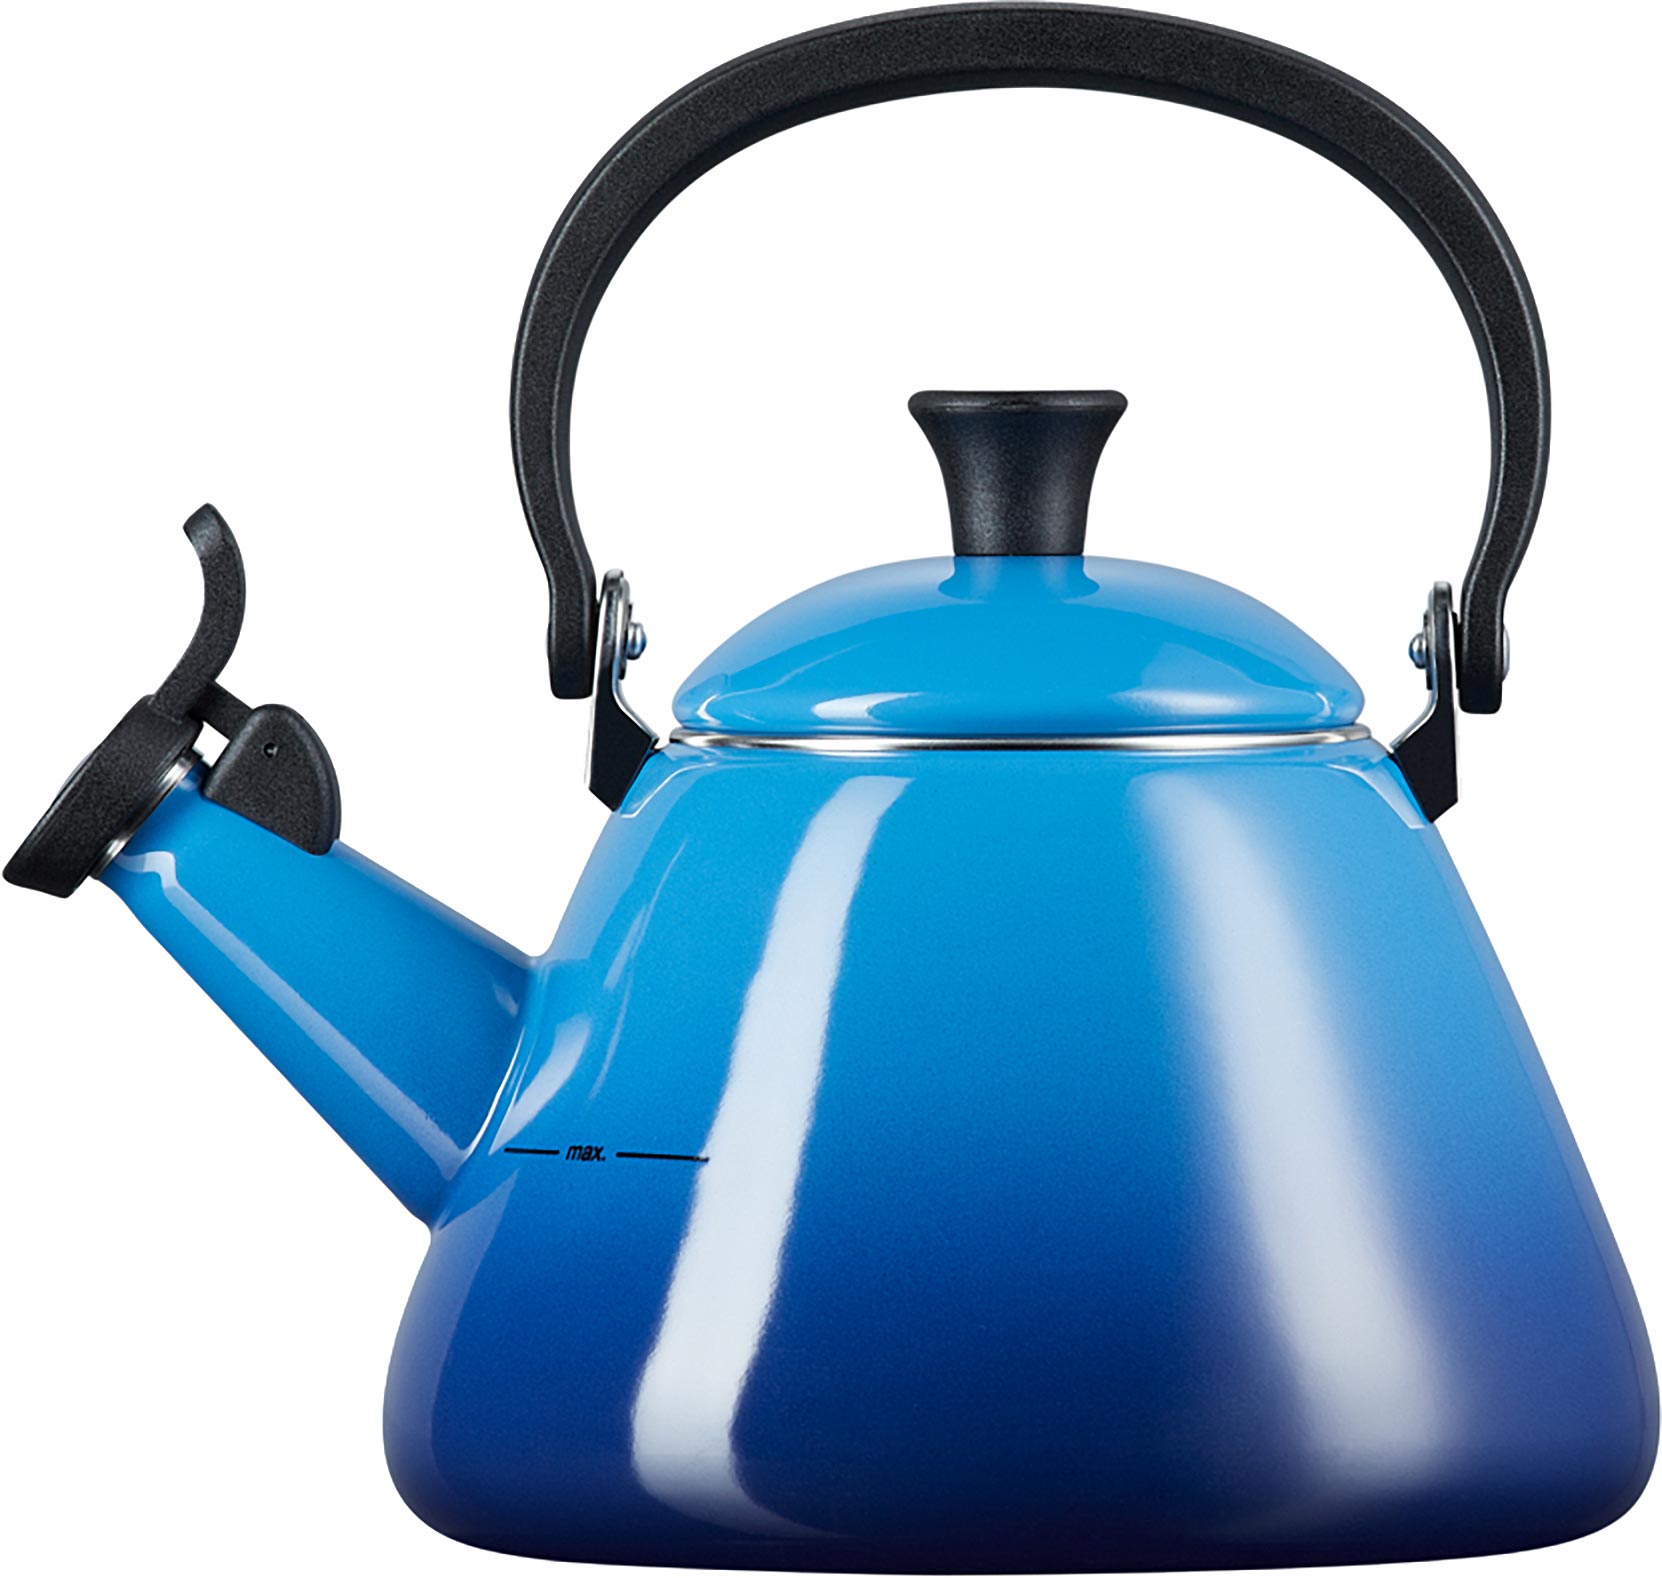 Le Creuset Kone Stovetop Kettle 1.6L with Whistle